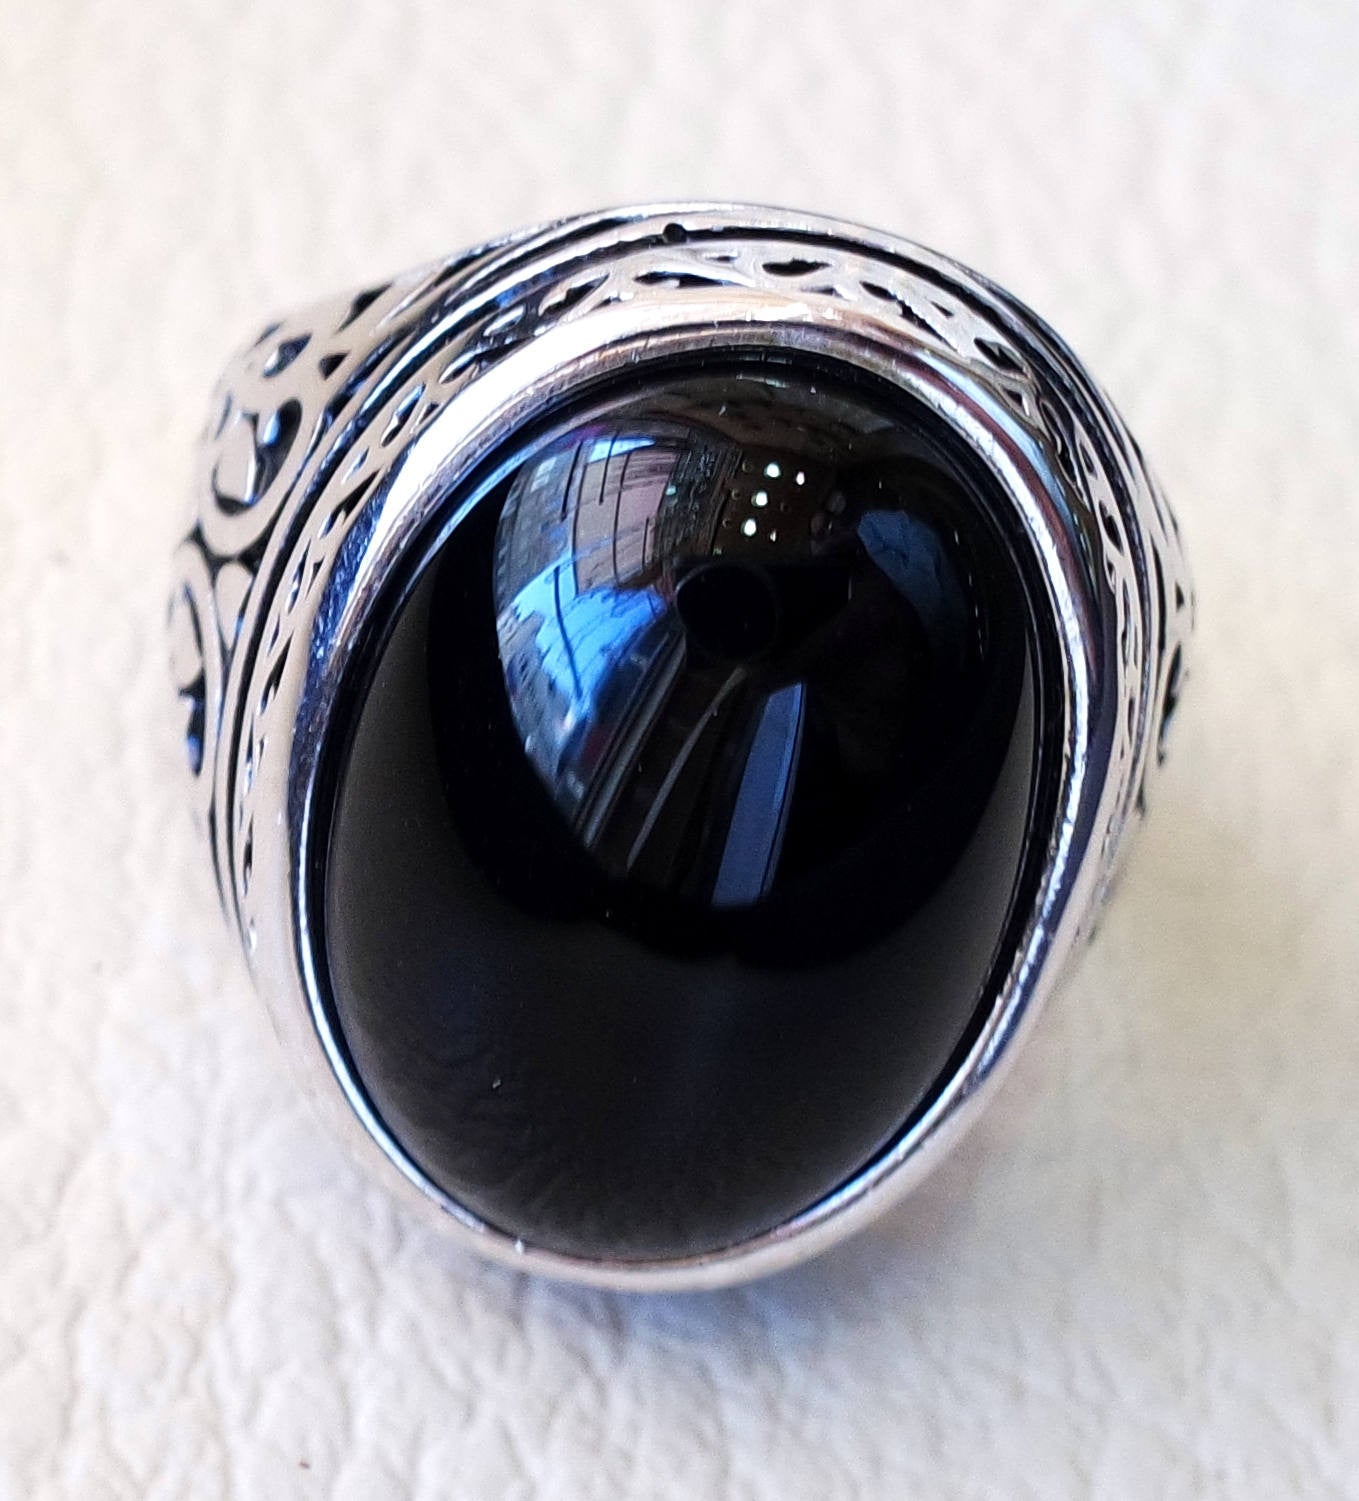 man ring sterling silver 925 all sizes onyx natural agate semi precious cabochon black gem arabic turkey antique middle eastern jewelry